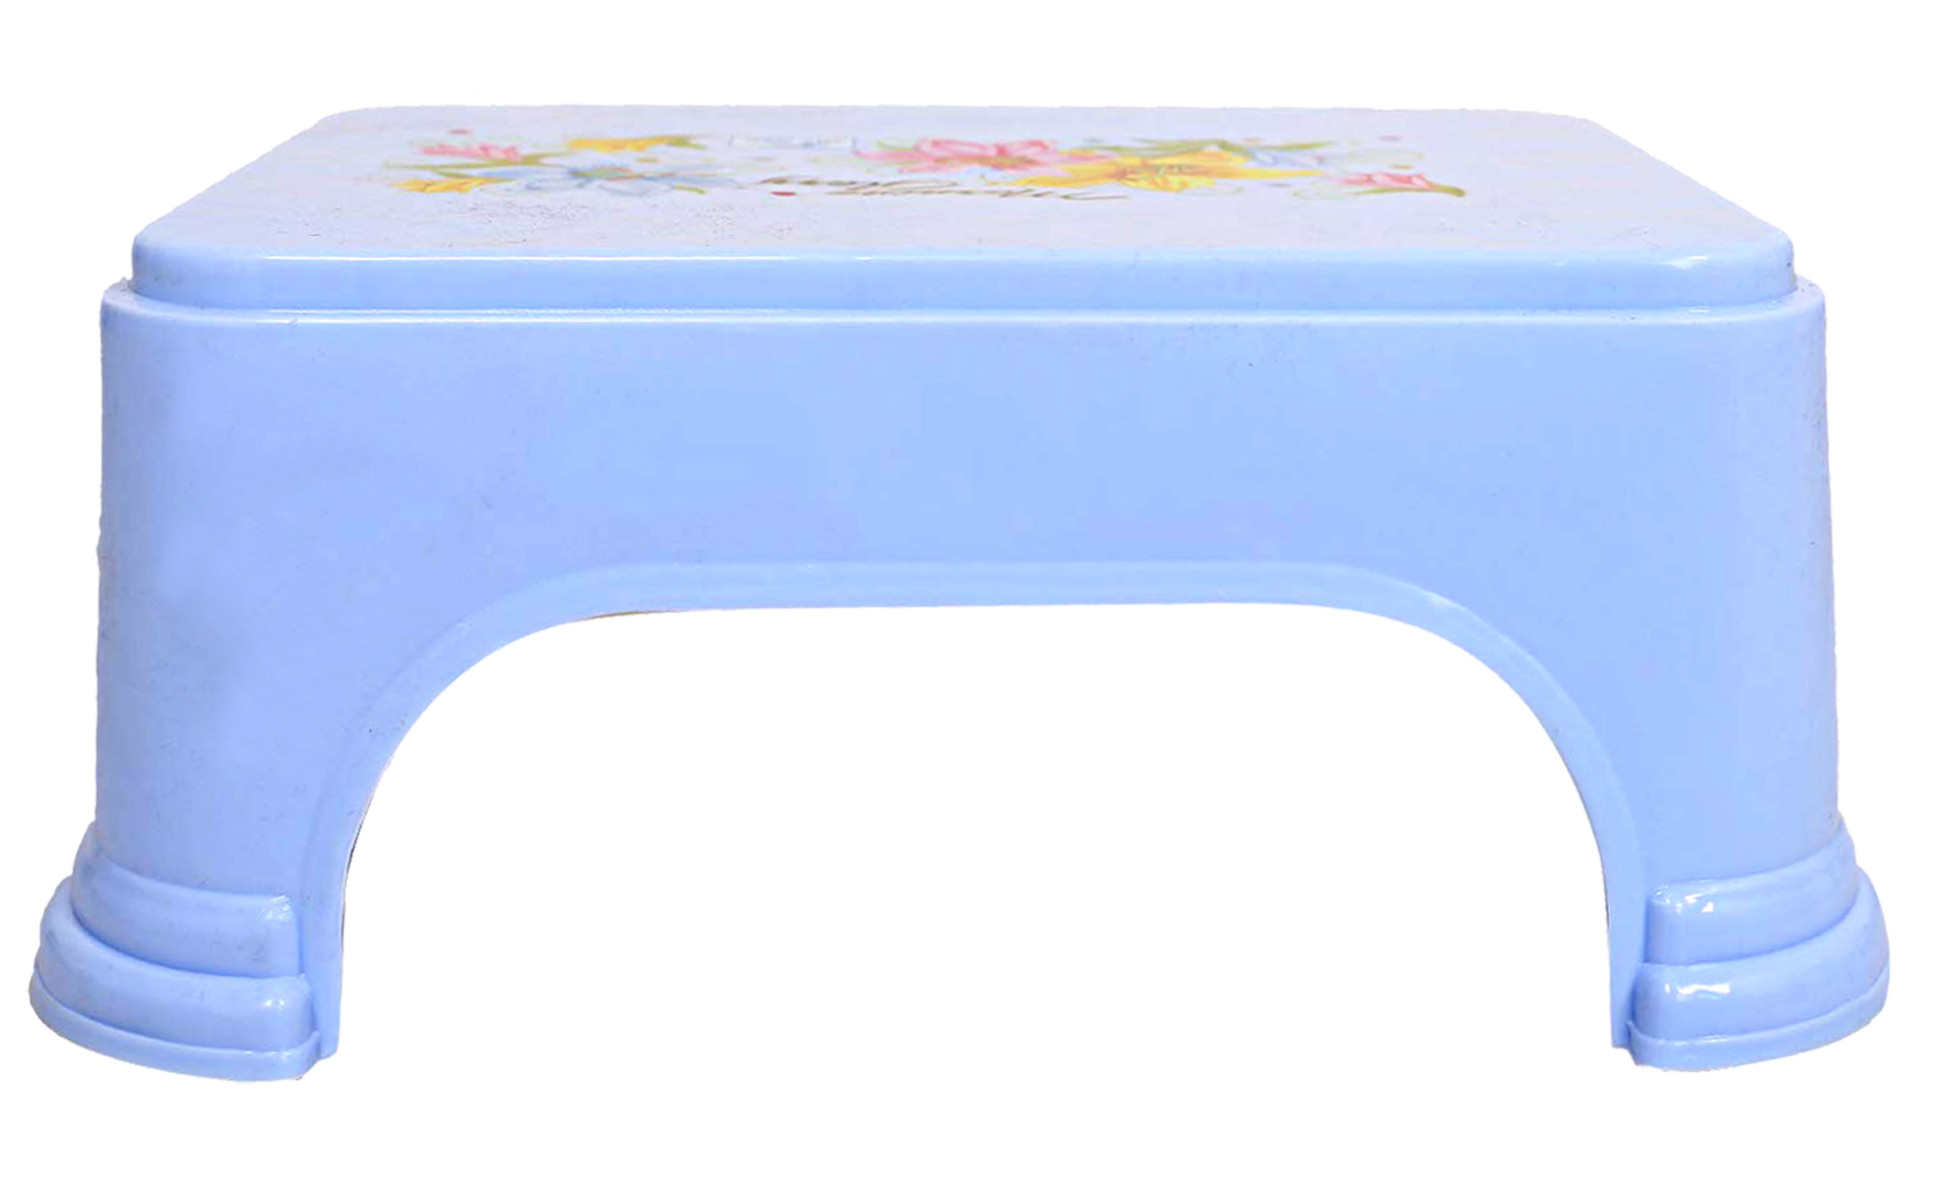 Kuber Industries Floral Print 2 Pieces Plastic Bathroom Stool, Adults Simple Style Stool Anti-Slip with Strong Bearing Stool for Home, Office, Kindergarten, Pink & Blue